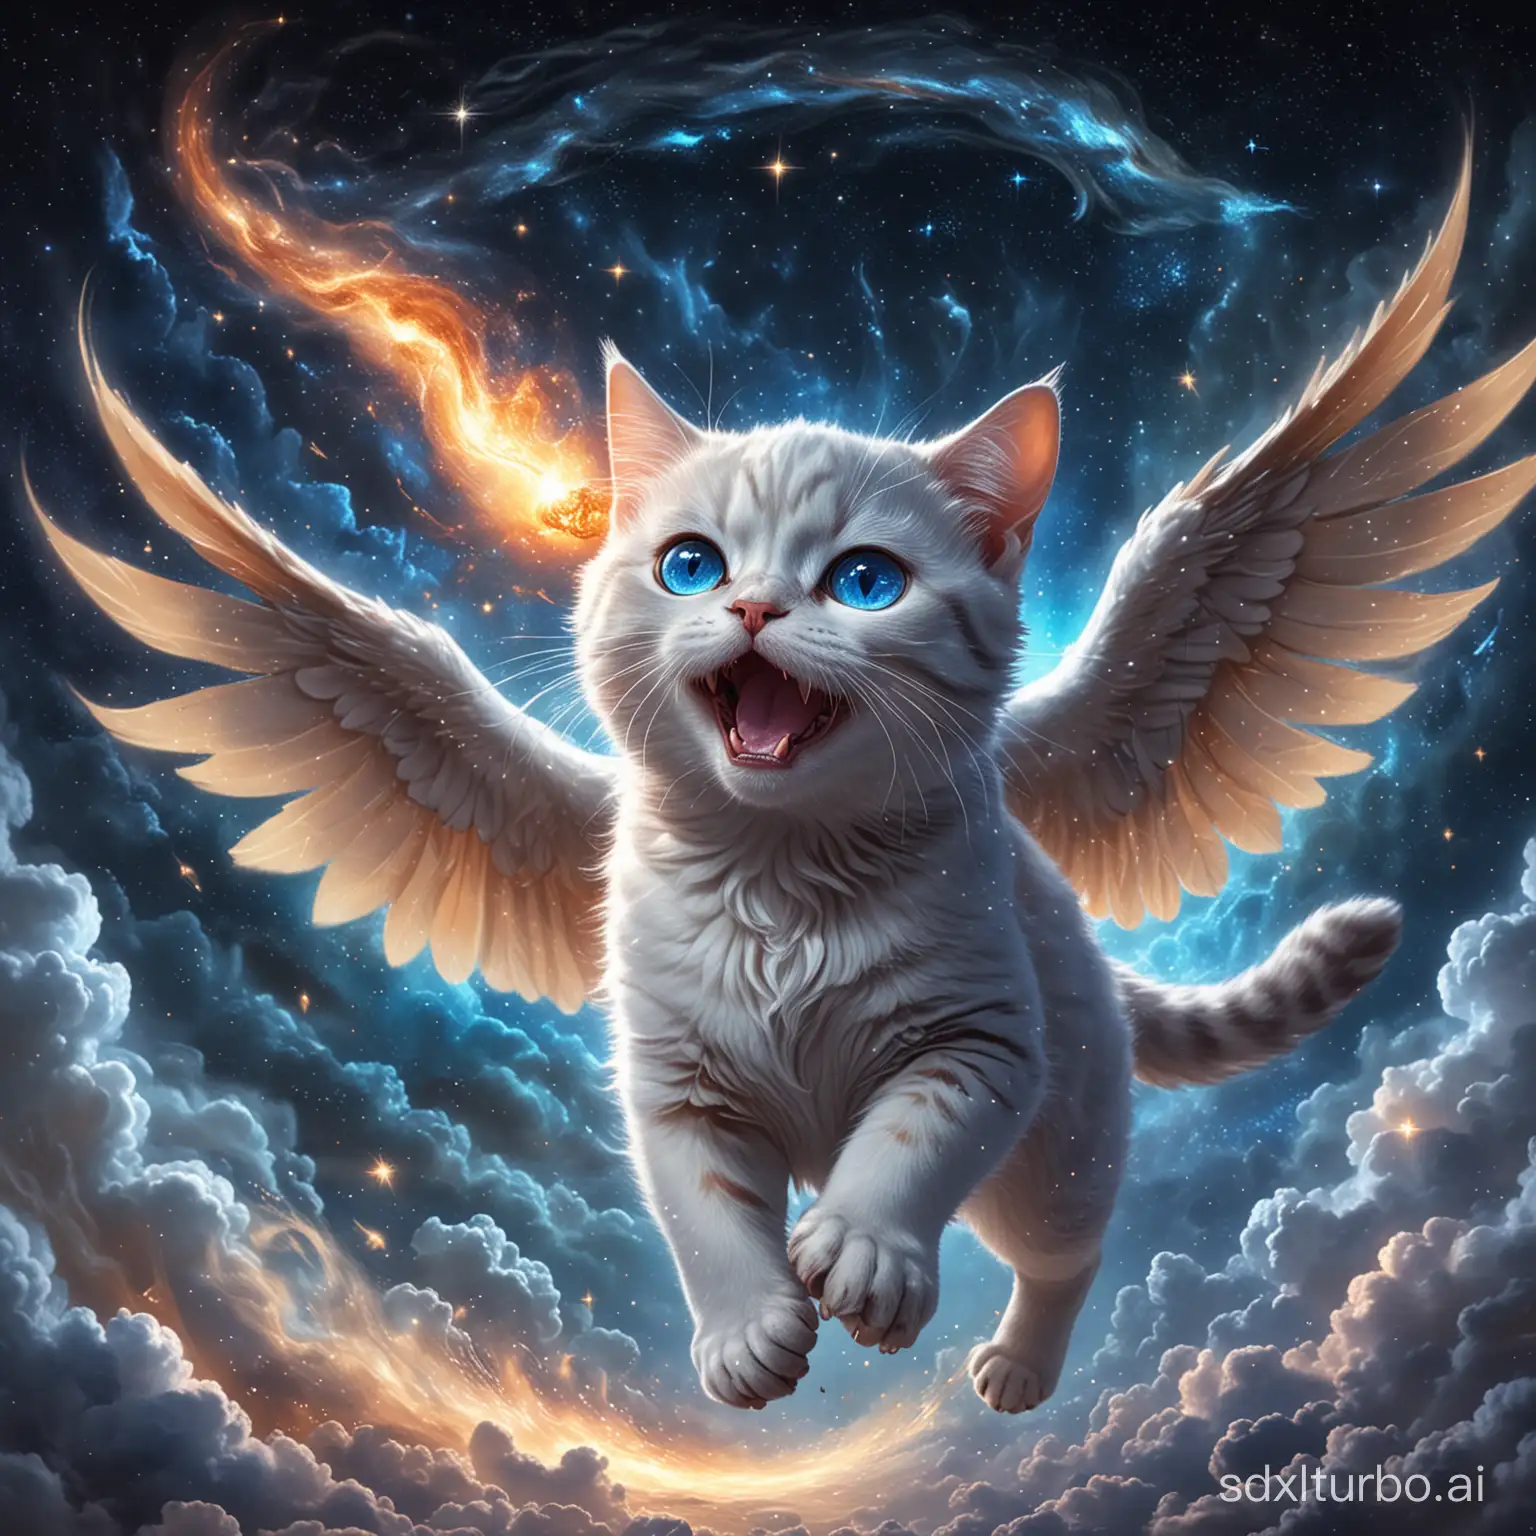 A cat with a wing, running in the starry sky, with a horn on its head, deep blue eyes, spewing fire from its mouth, and its body transparent like crystal.